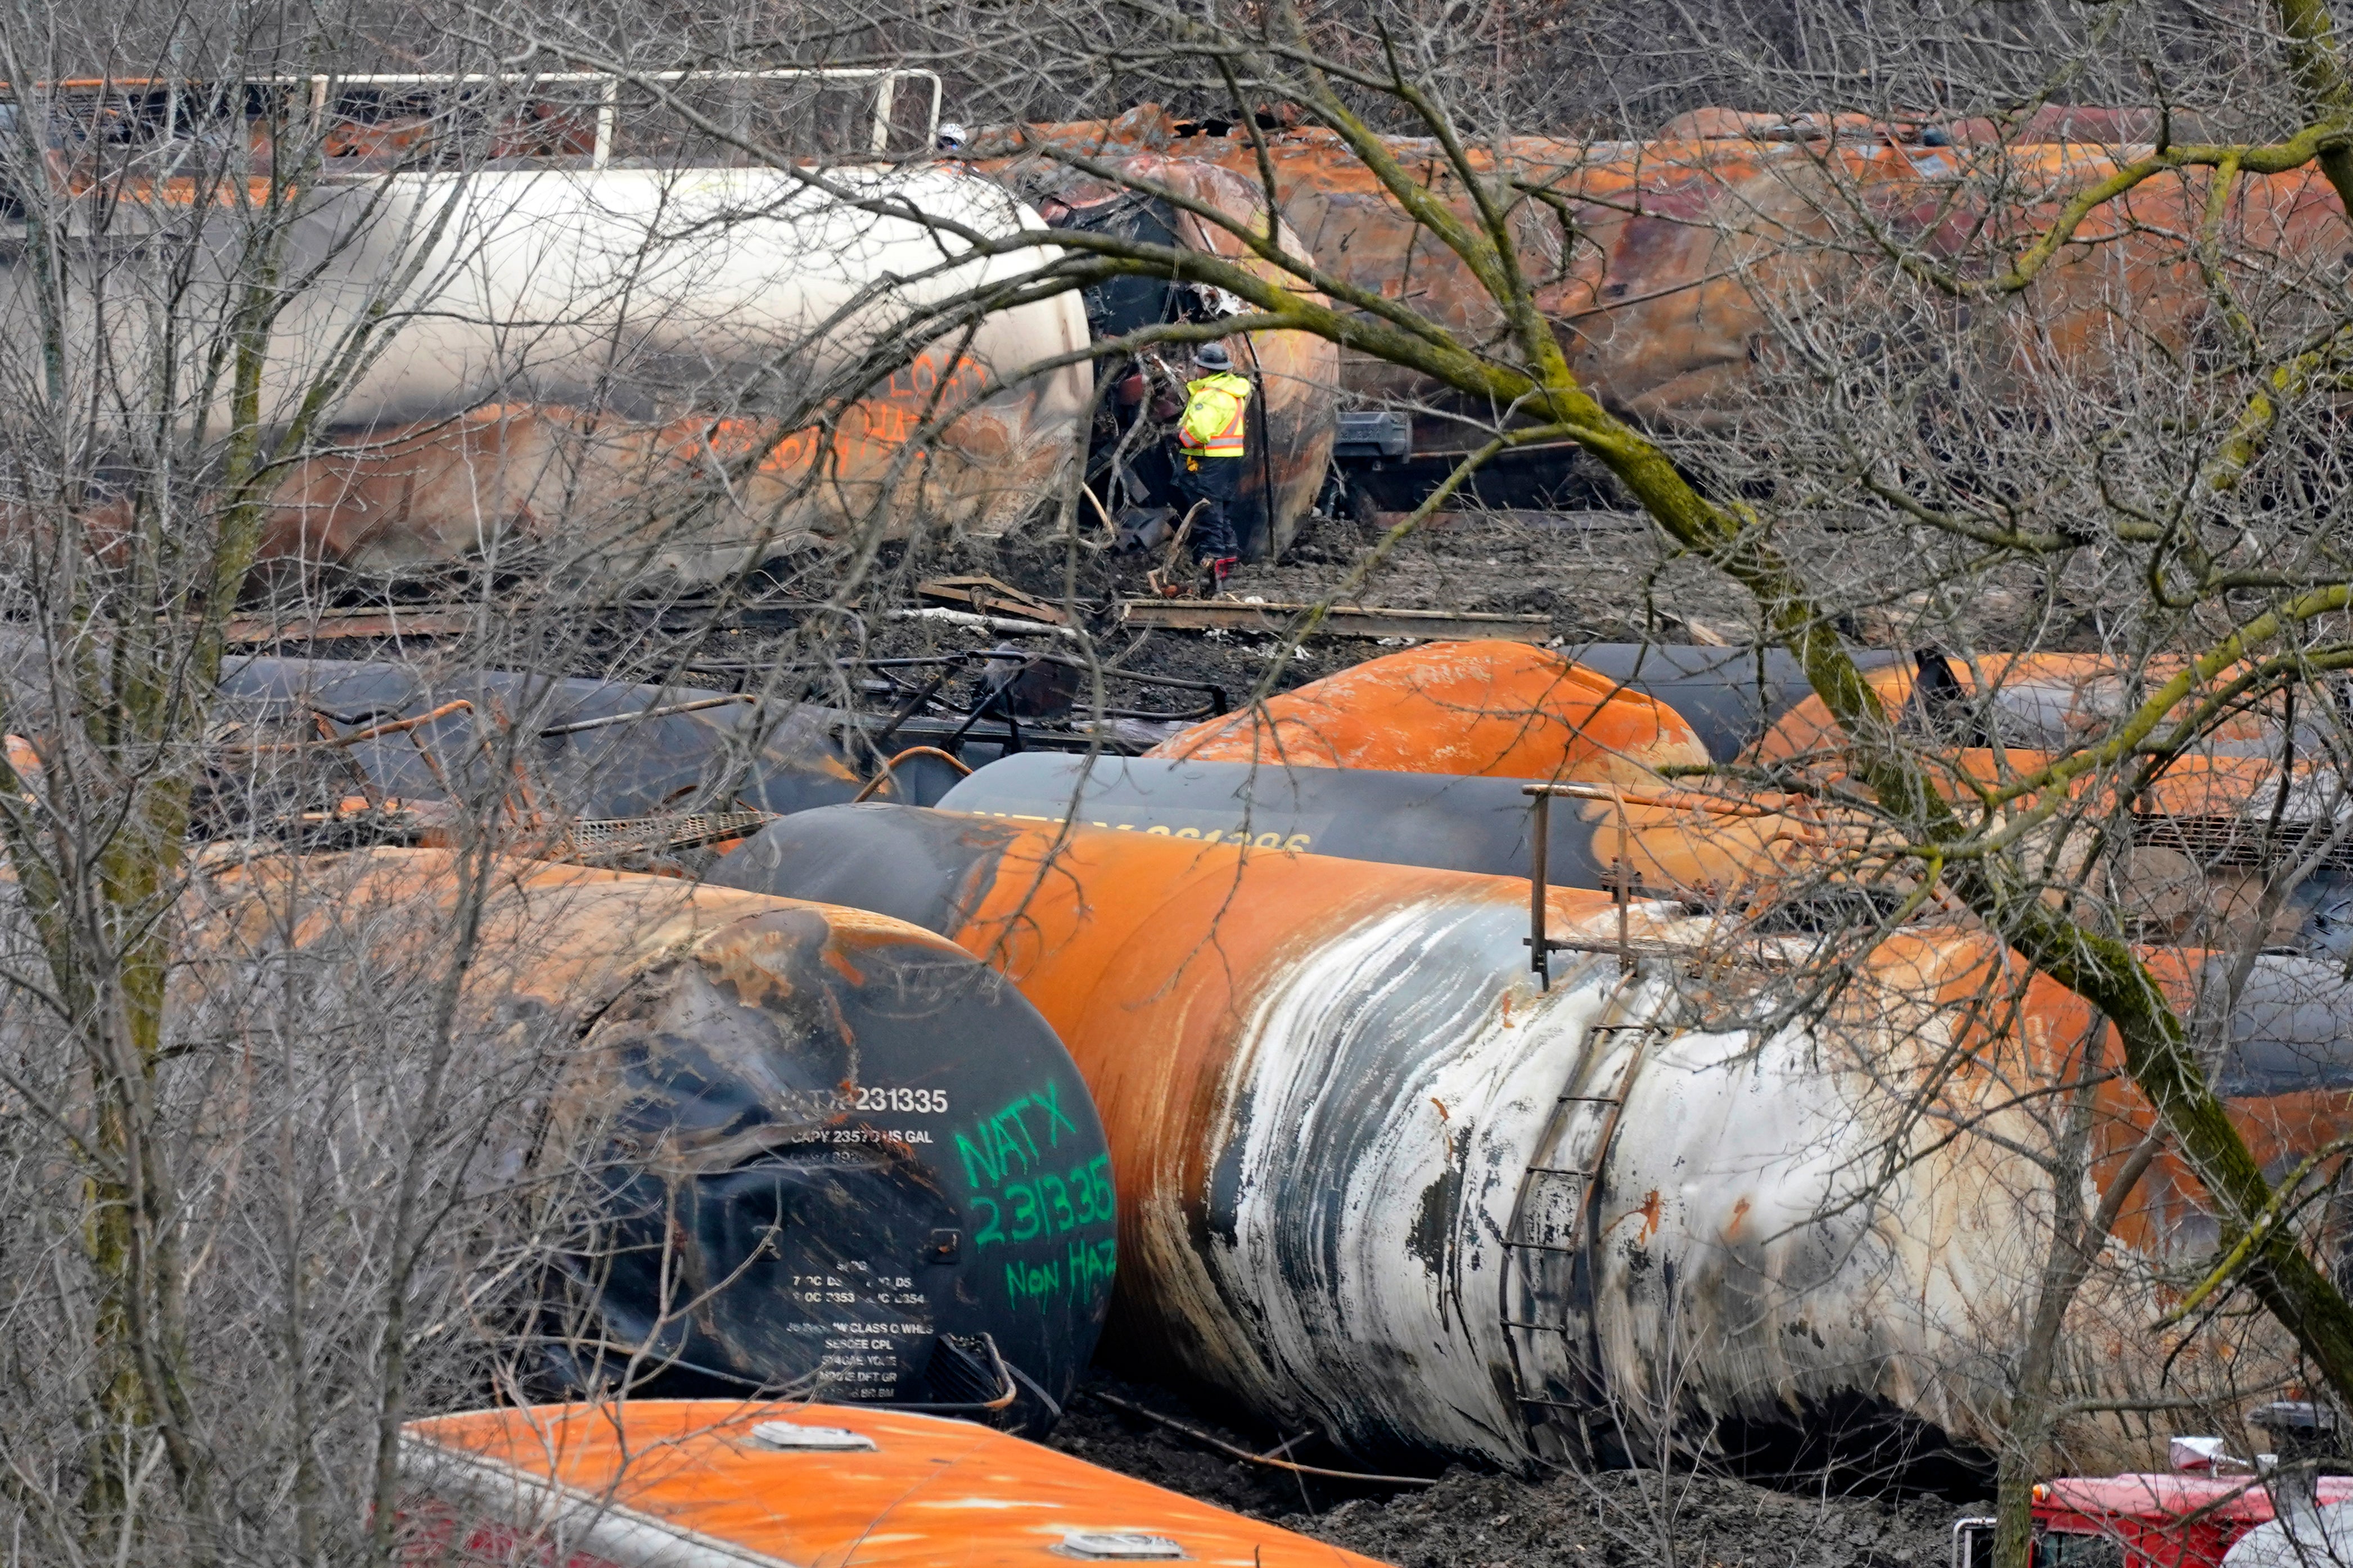 The cleanup of portions of a Norfolk Southern freight train that derailed Feb. 3, in East Palestine, Ohio, continues.